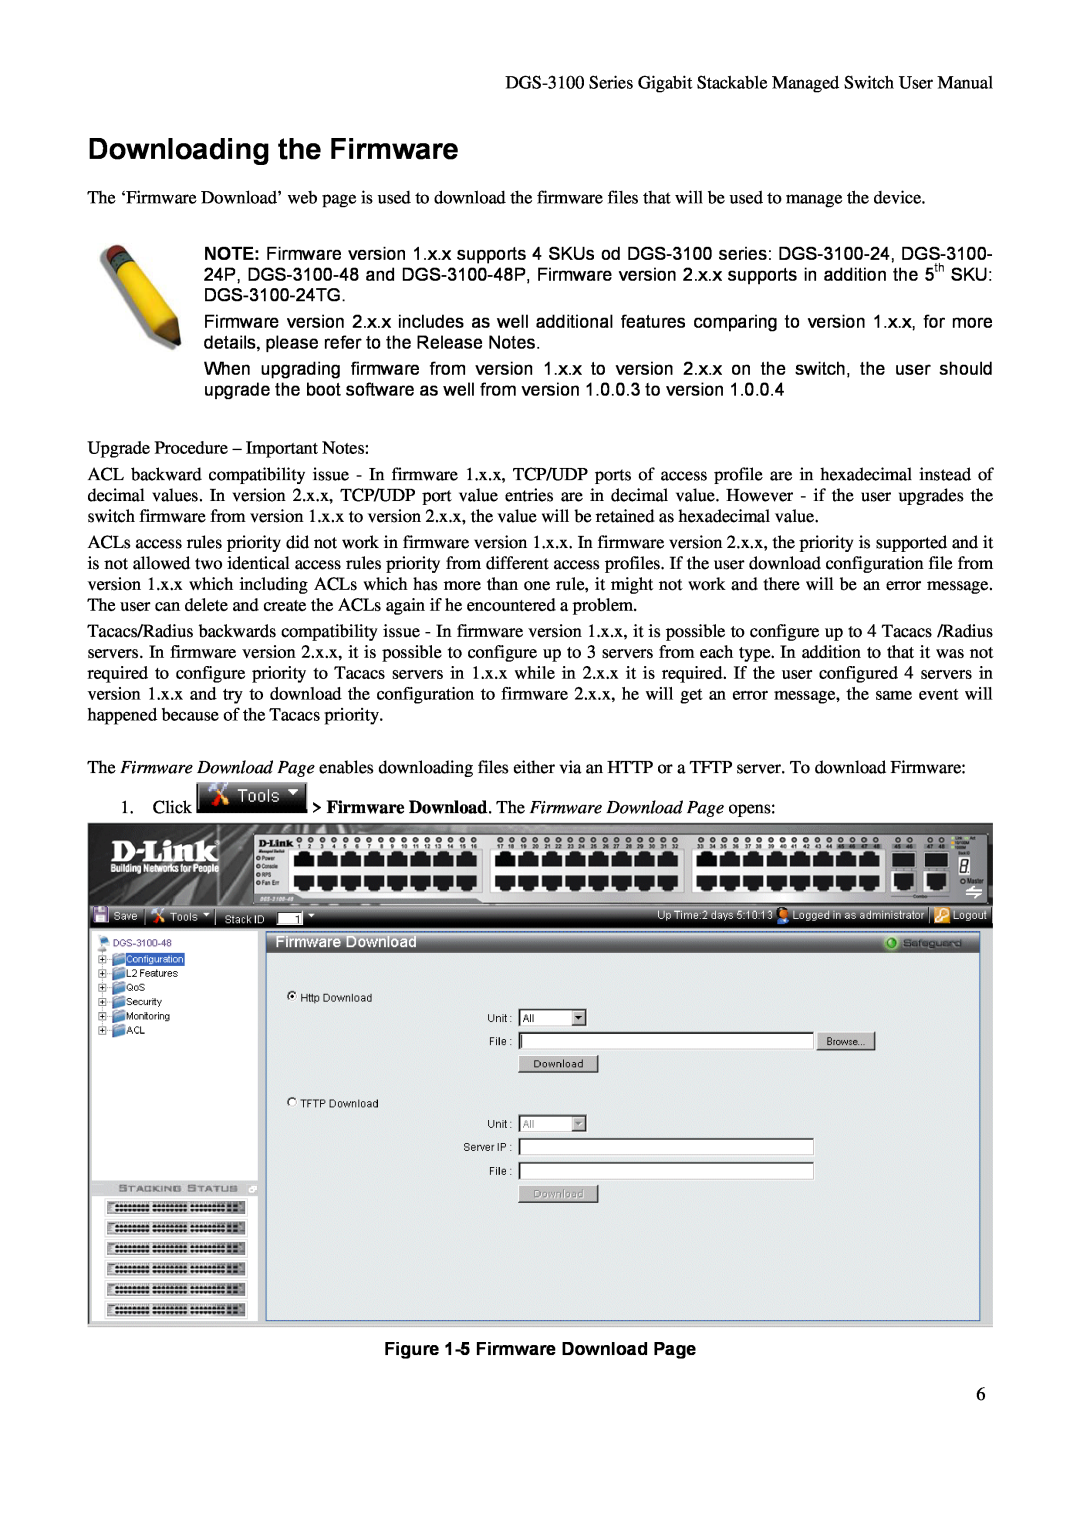 D-Link DGS-3100 user manual Downloading the Firmware, Click Firmware Download. The Firmware Download Page opens 